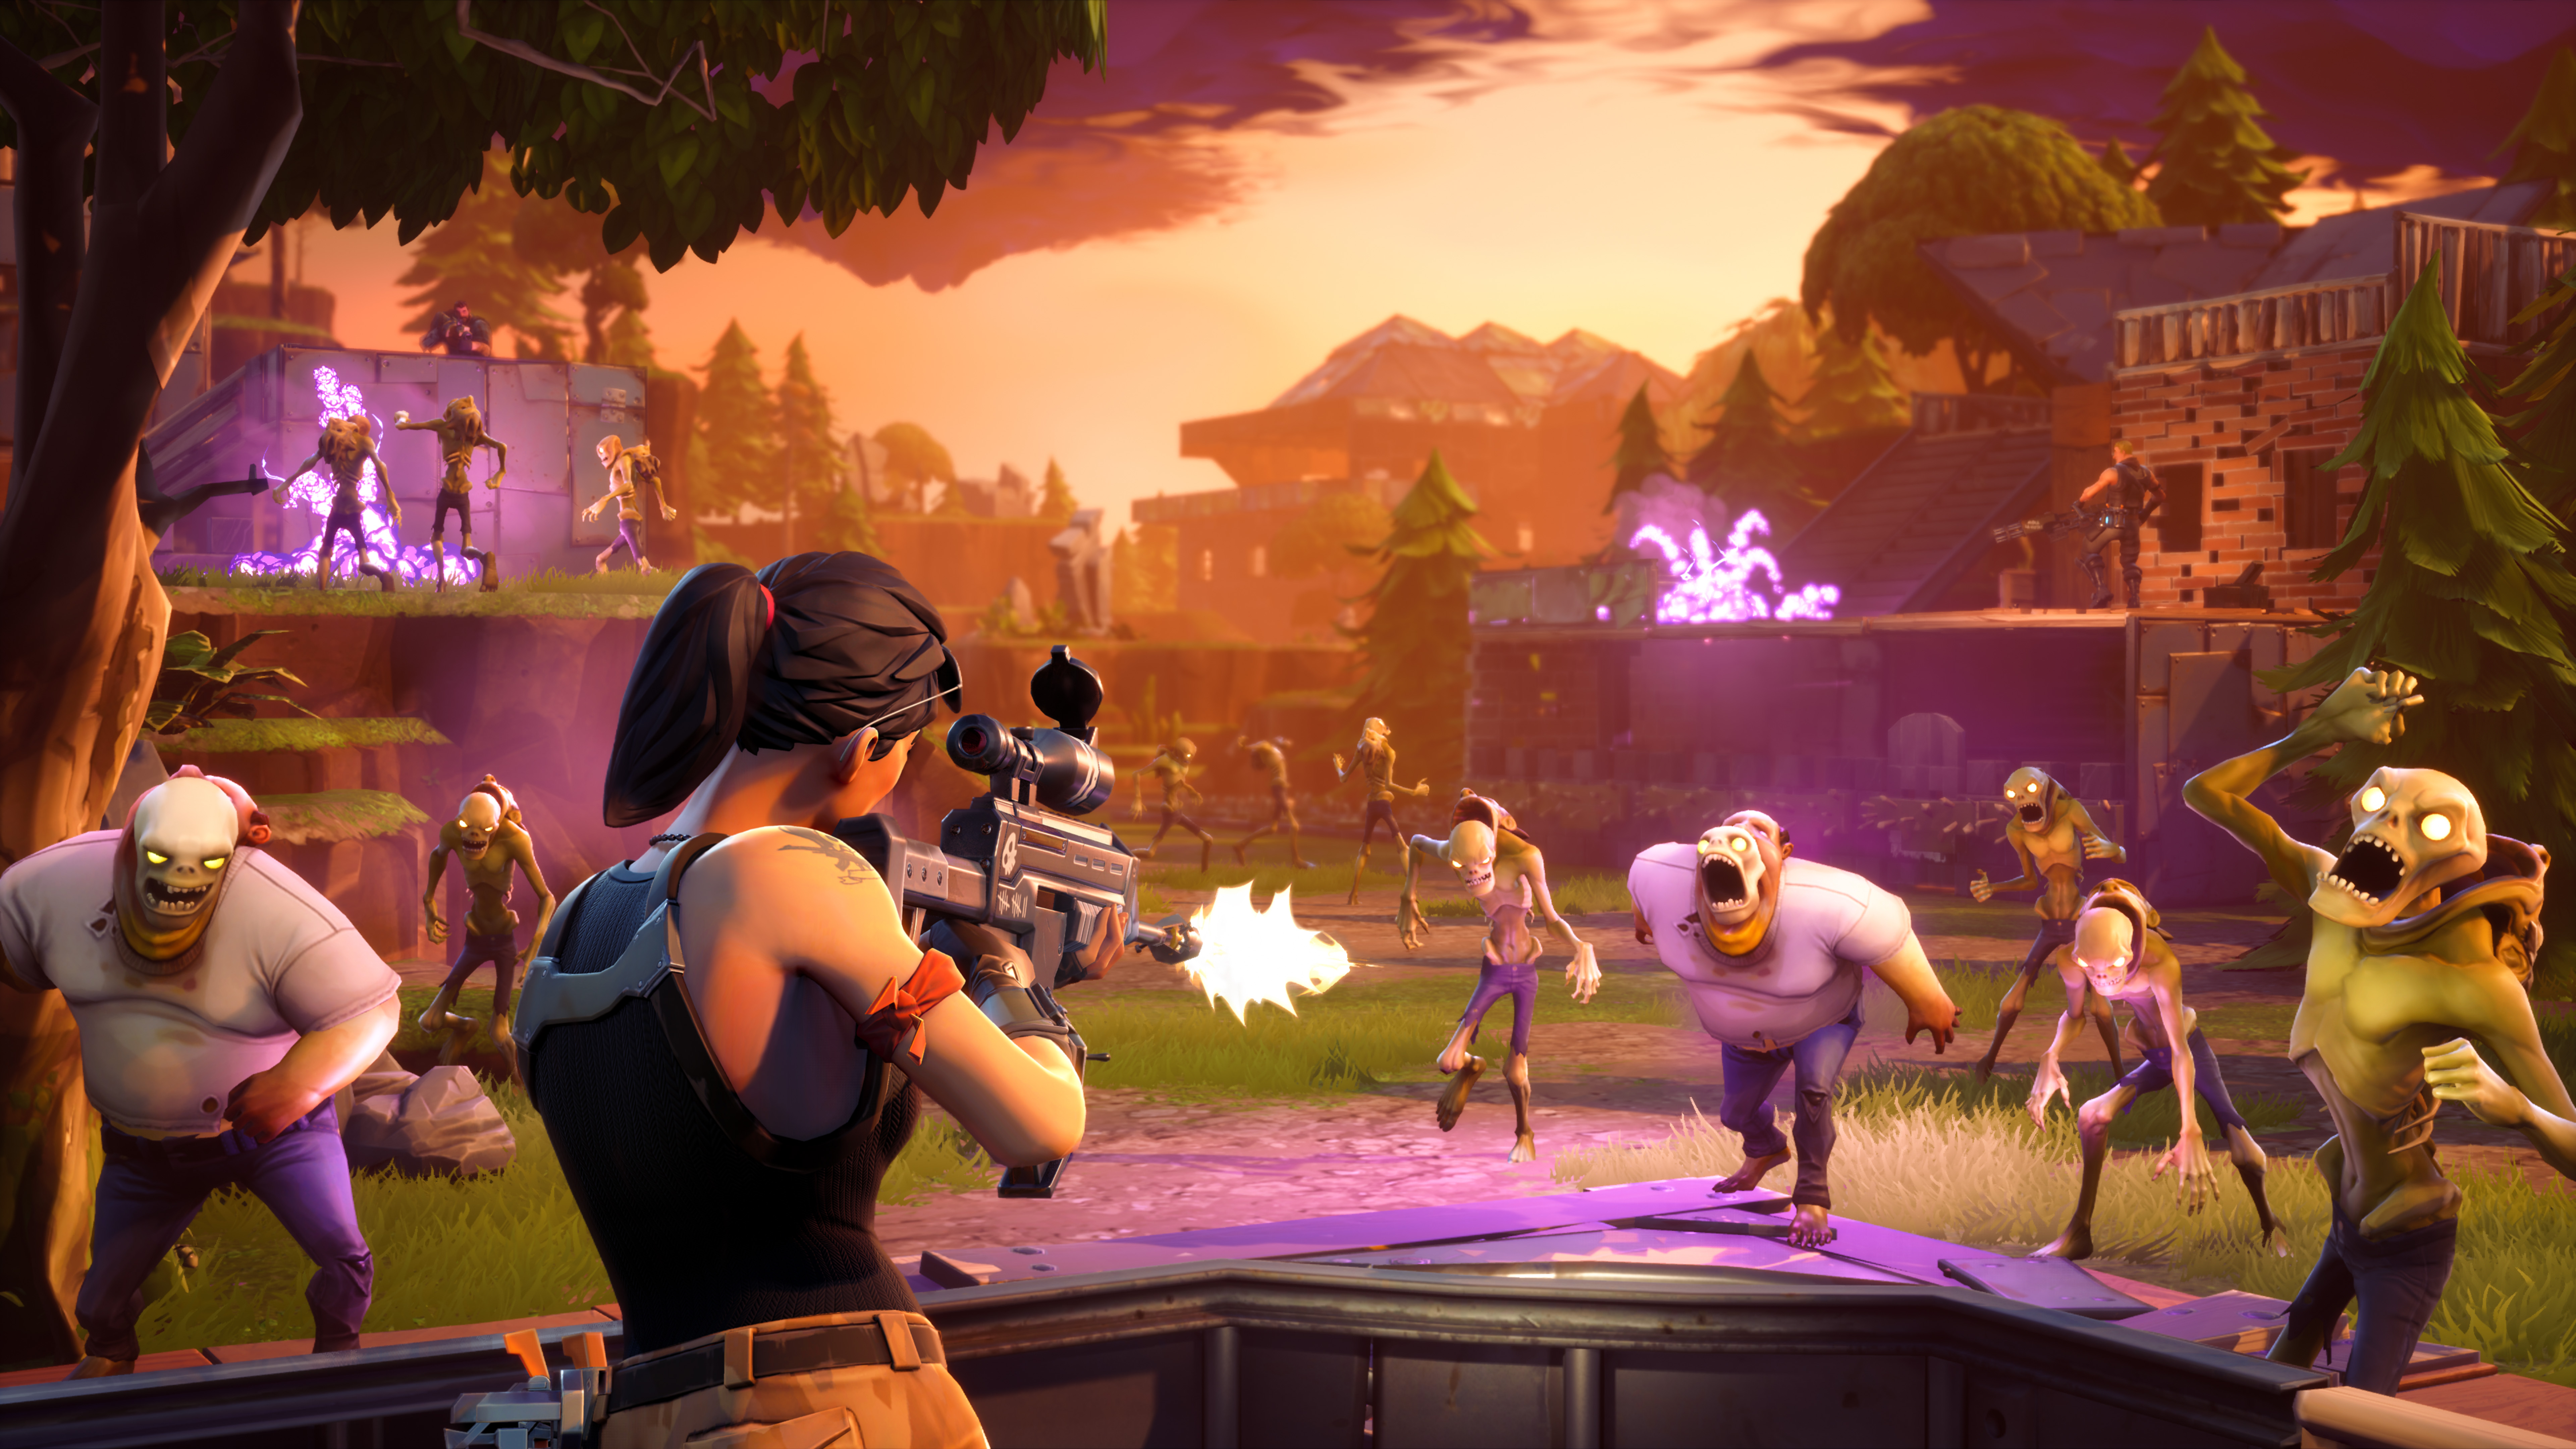 enlarge at its best fortnite looks and feels like this nicely staged promo pic of in game action however so many free to play annoyances drag this - fortnite free xp